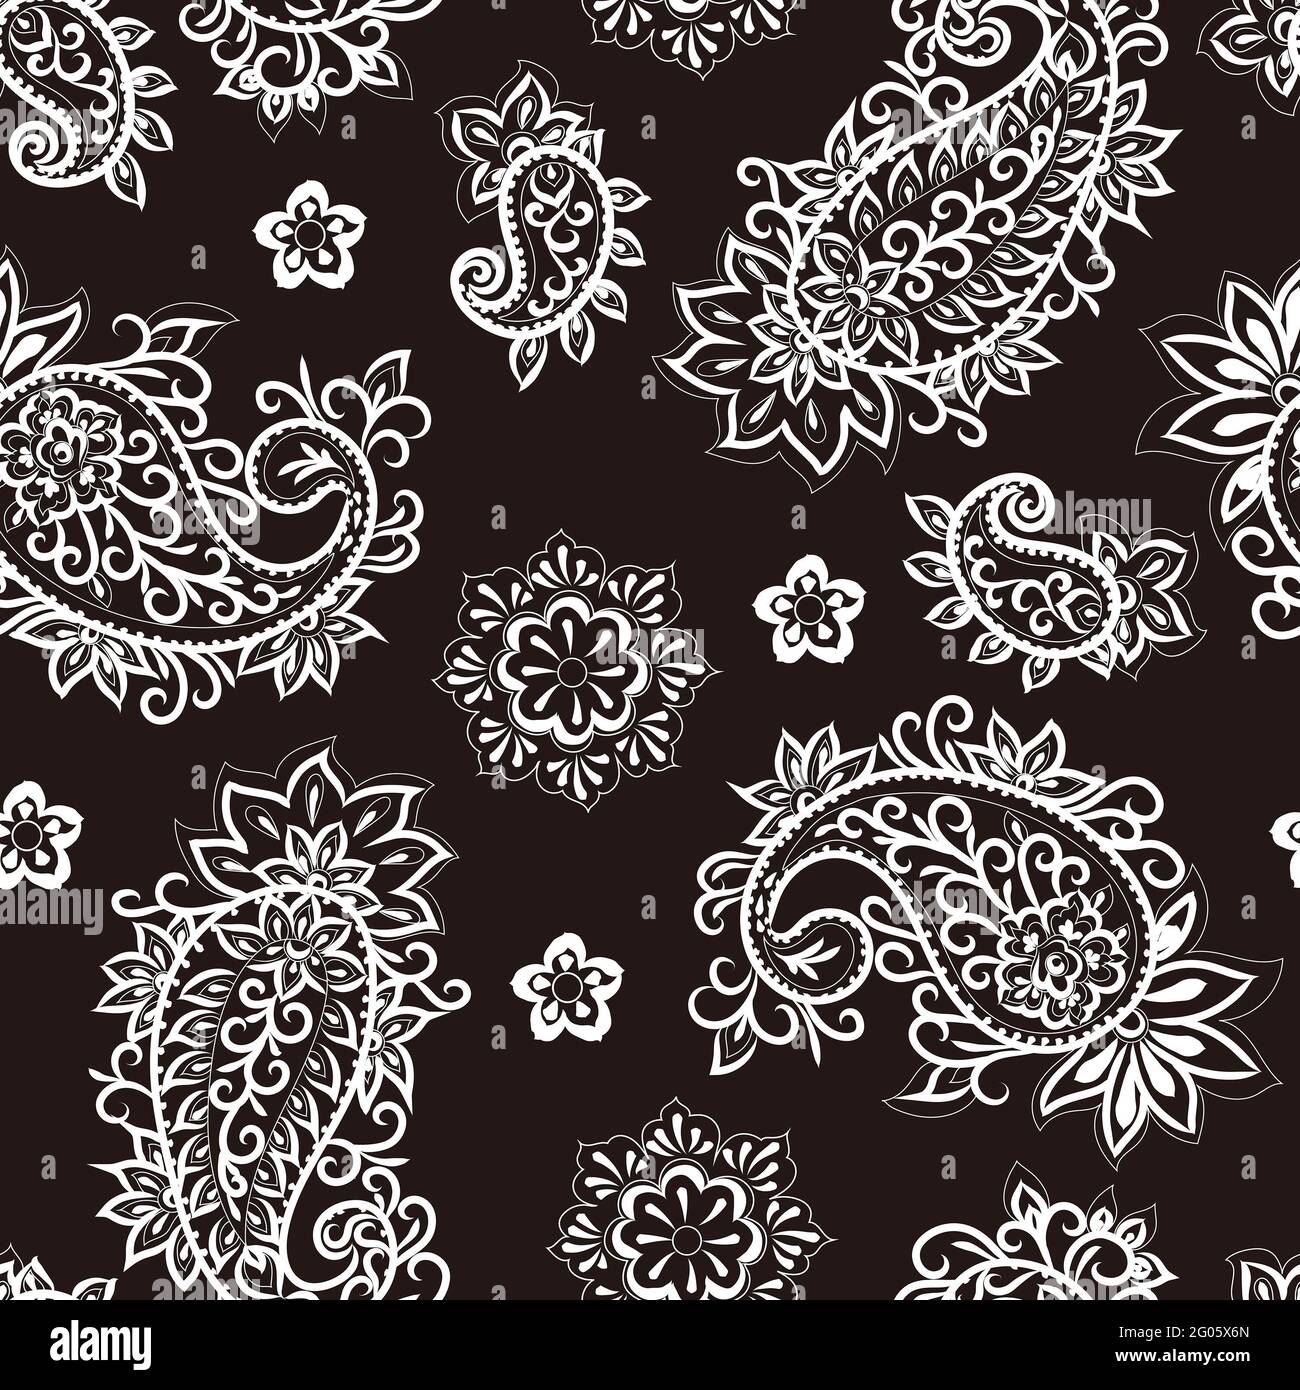 Seamless paisley pattern on a black background. Elegant hand drawn vector design elements. Stock Photo